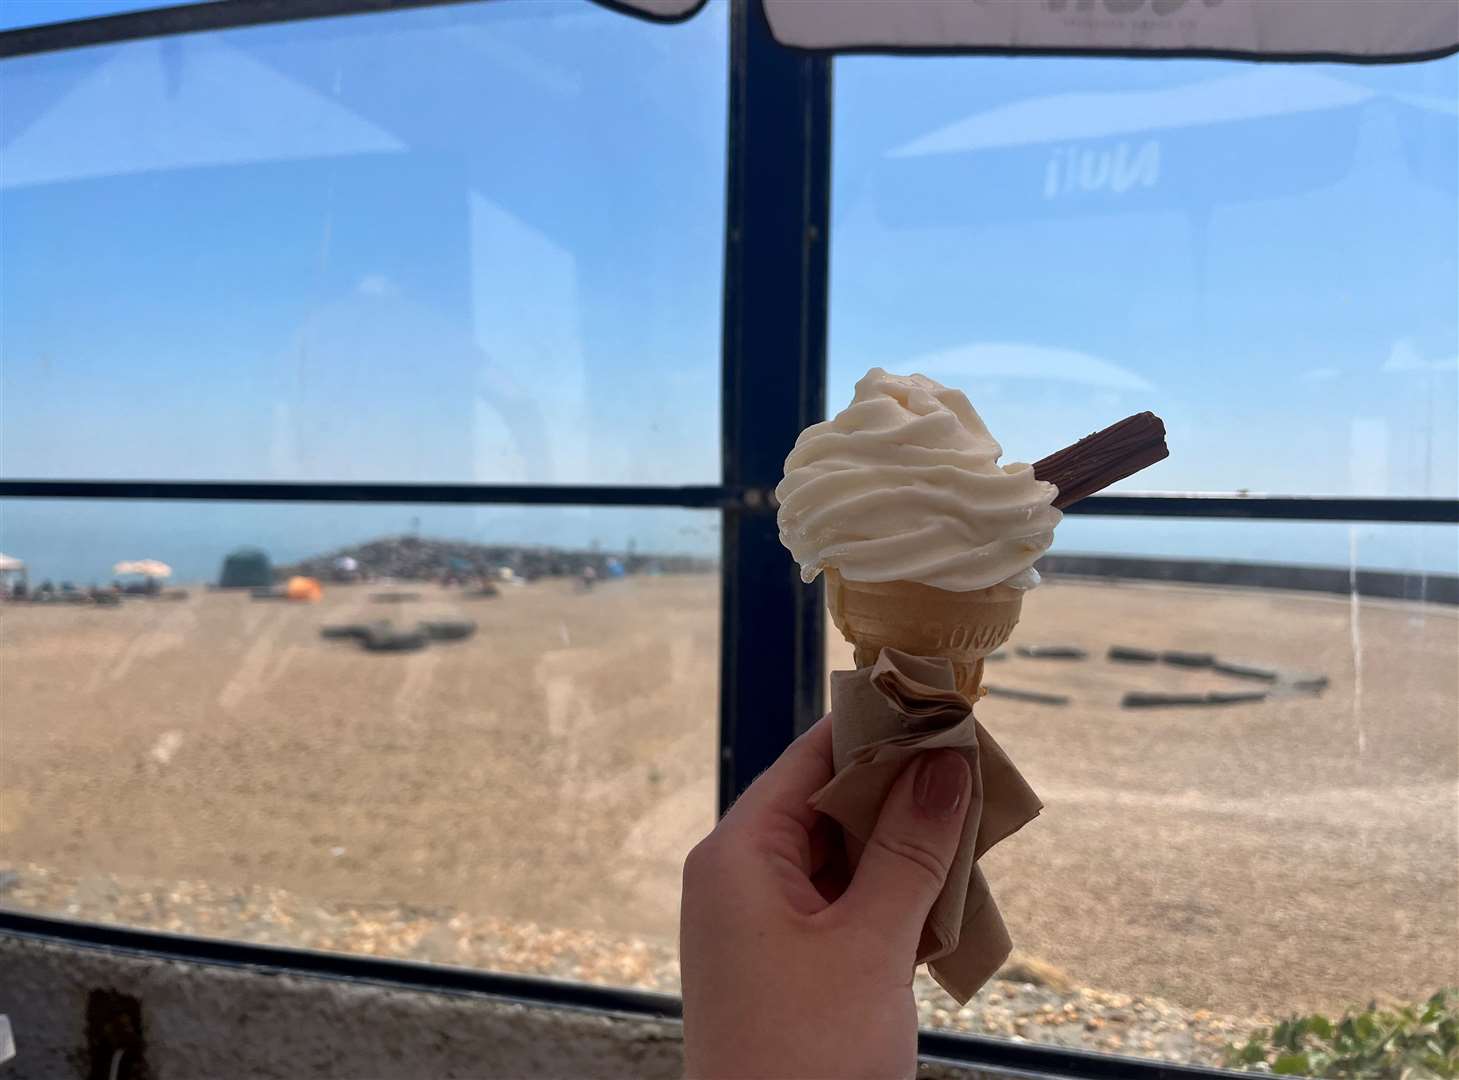 Since it was the hottest day of the year, it was only right to top it off with an ice cream